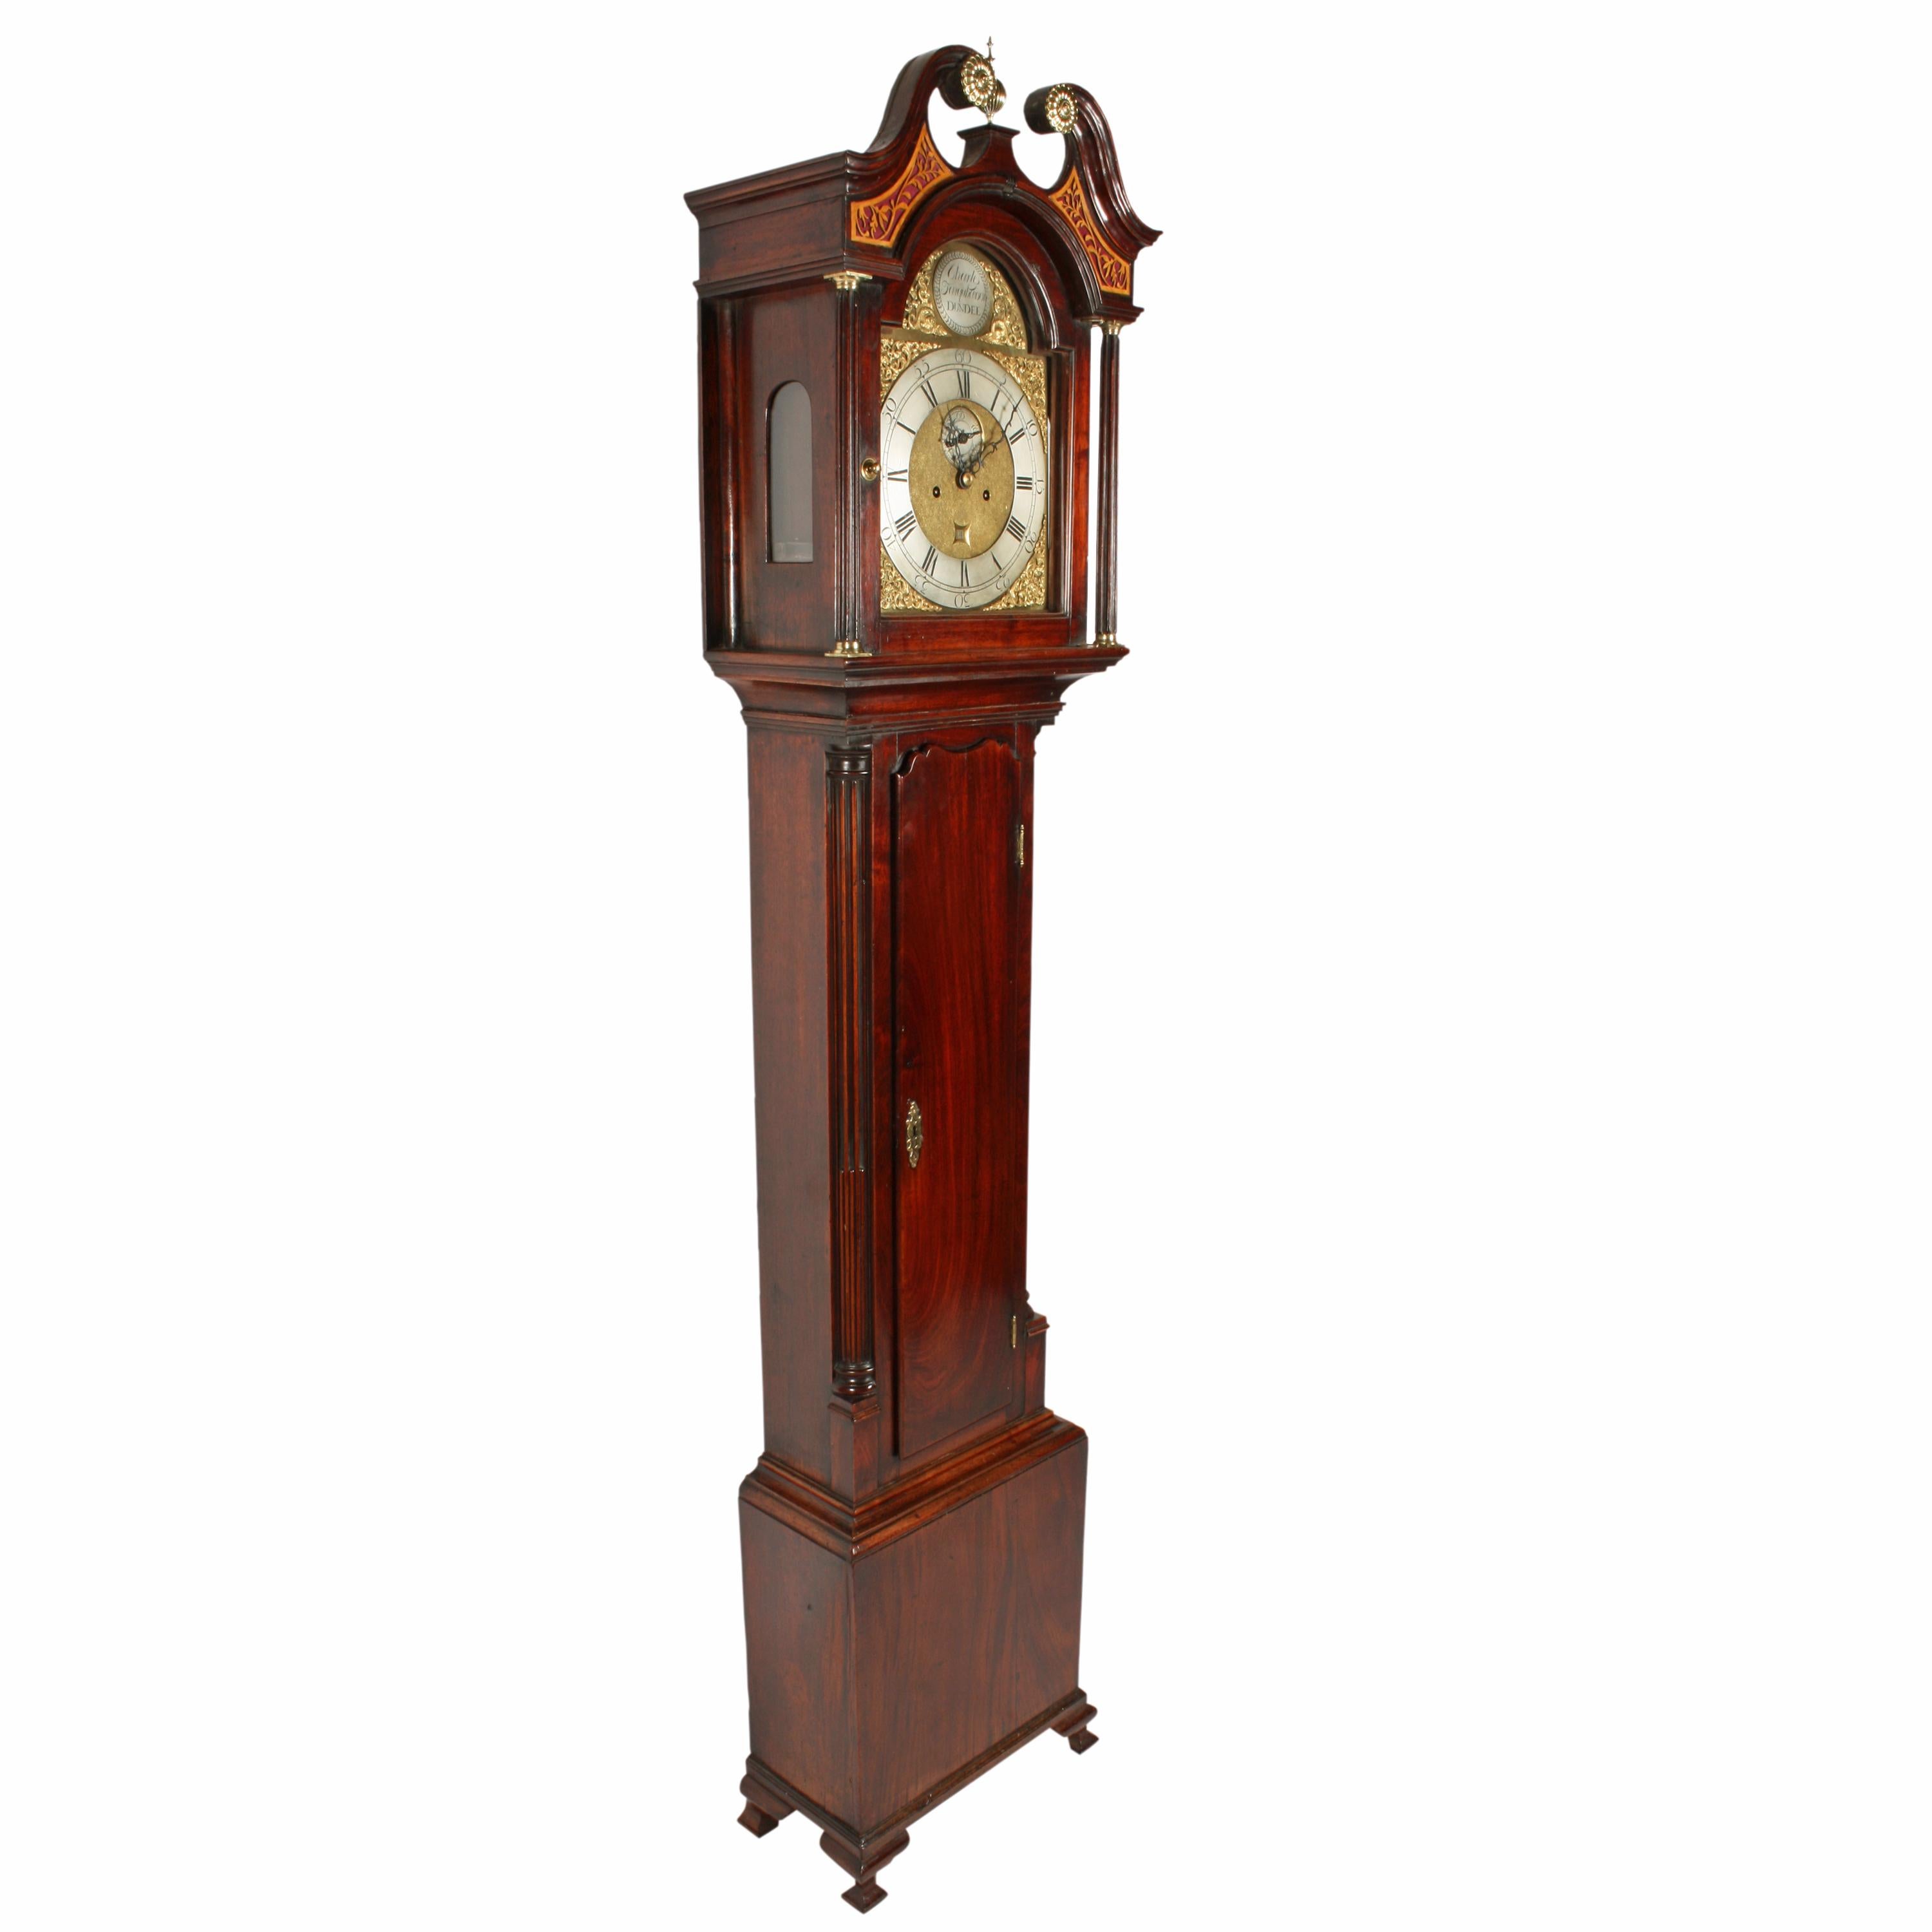 An 18th century Georgian Scottish mahogany brass dial grandfather clock.

The clock has an eight day striking movement with a brass dial that has a silverised chapter ring and a seconds dial.

The top of the dial has a silverised maker's name